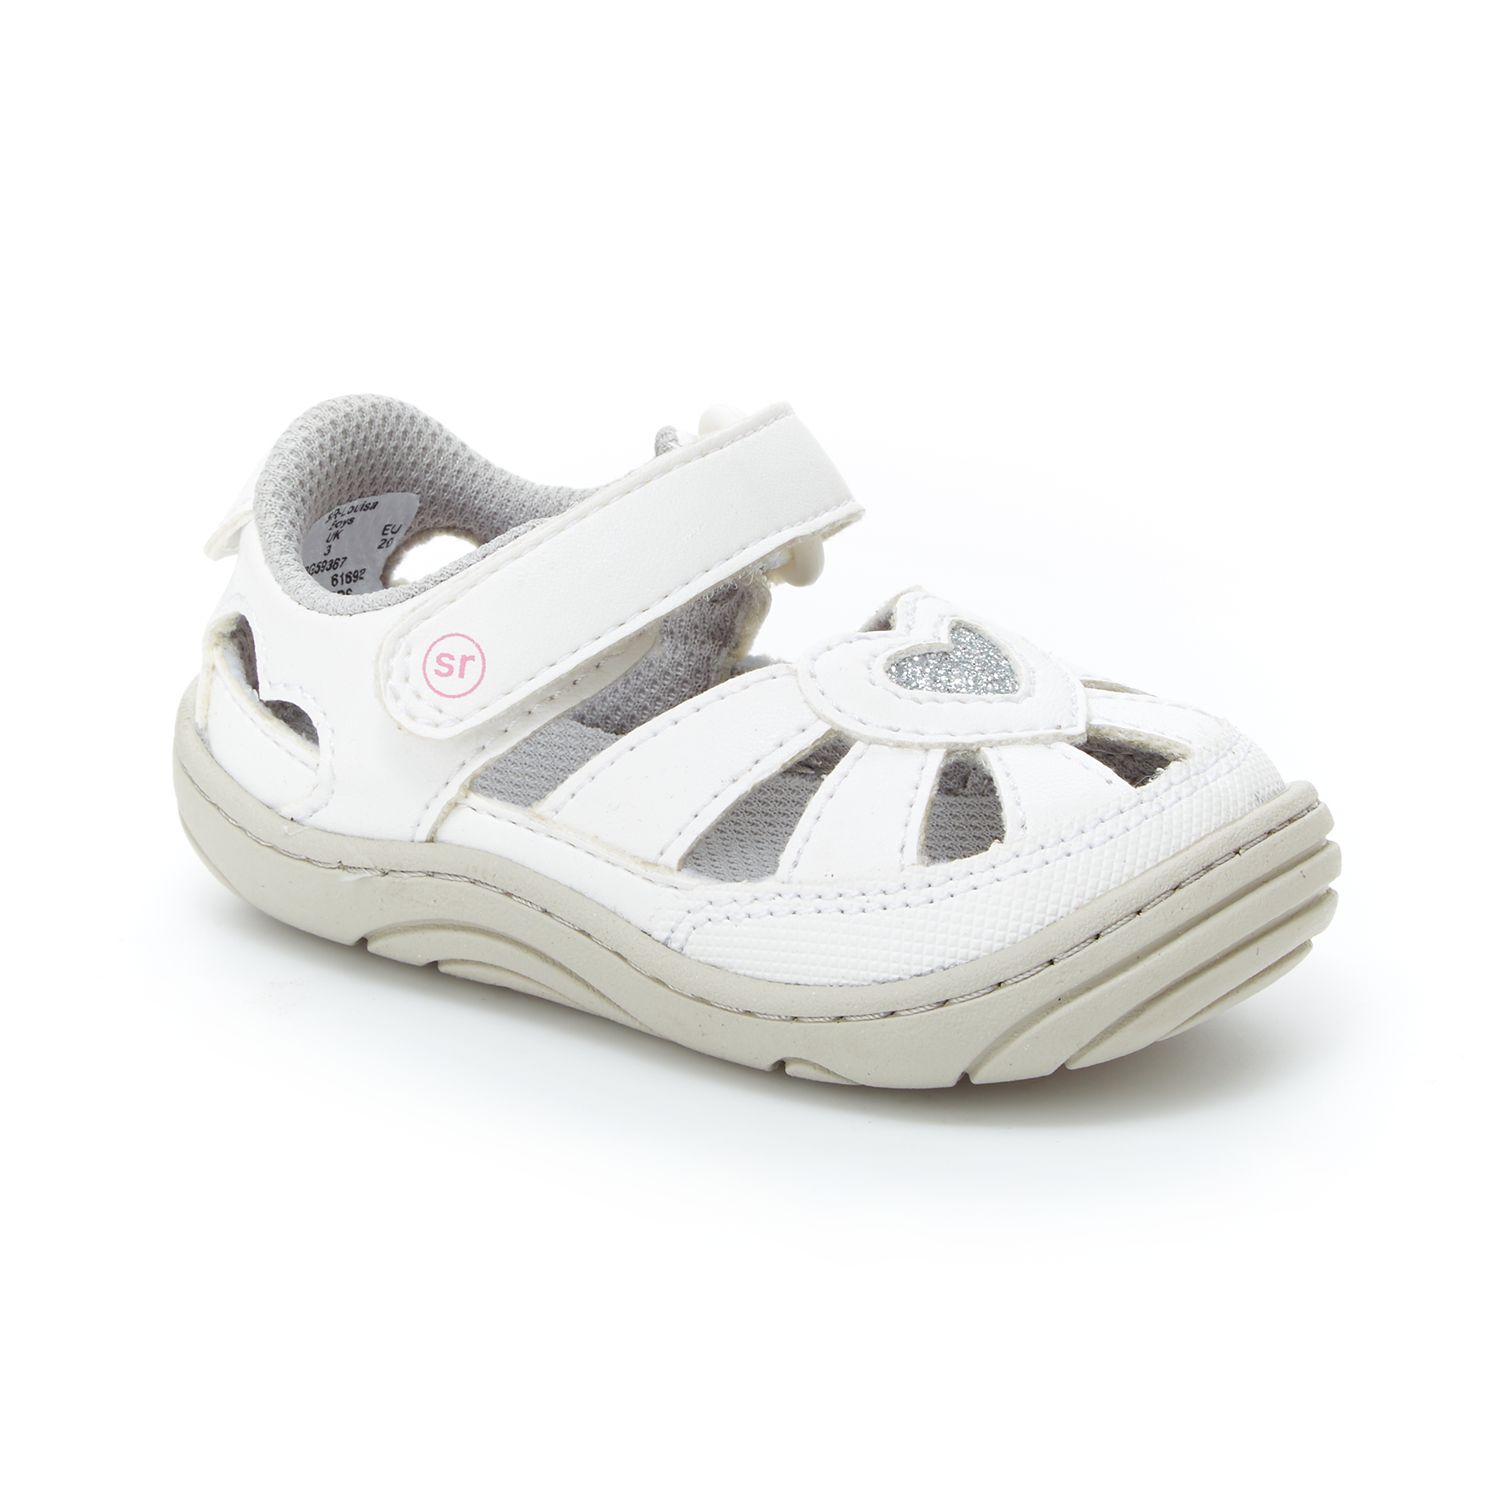 baby girl size 3c shoes